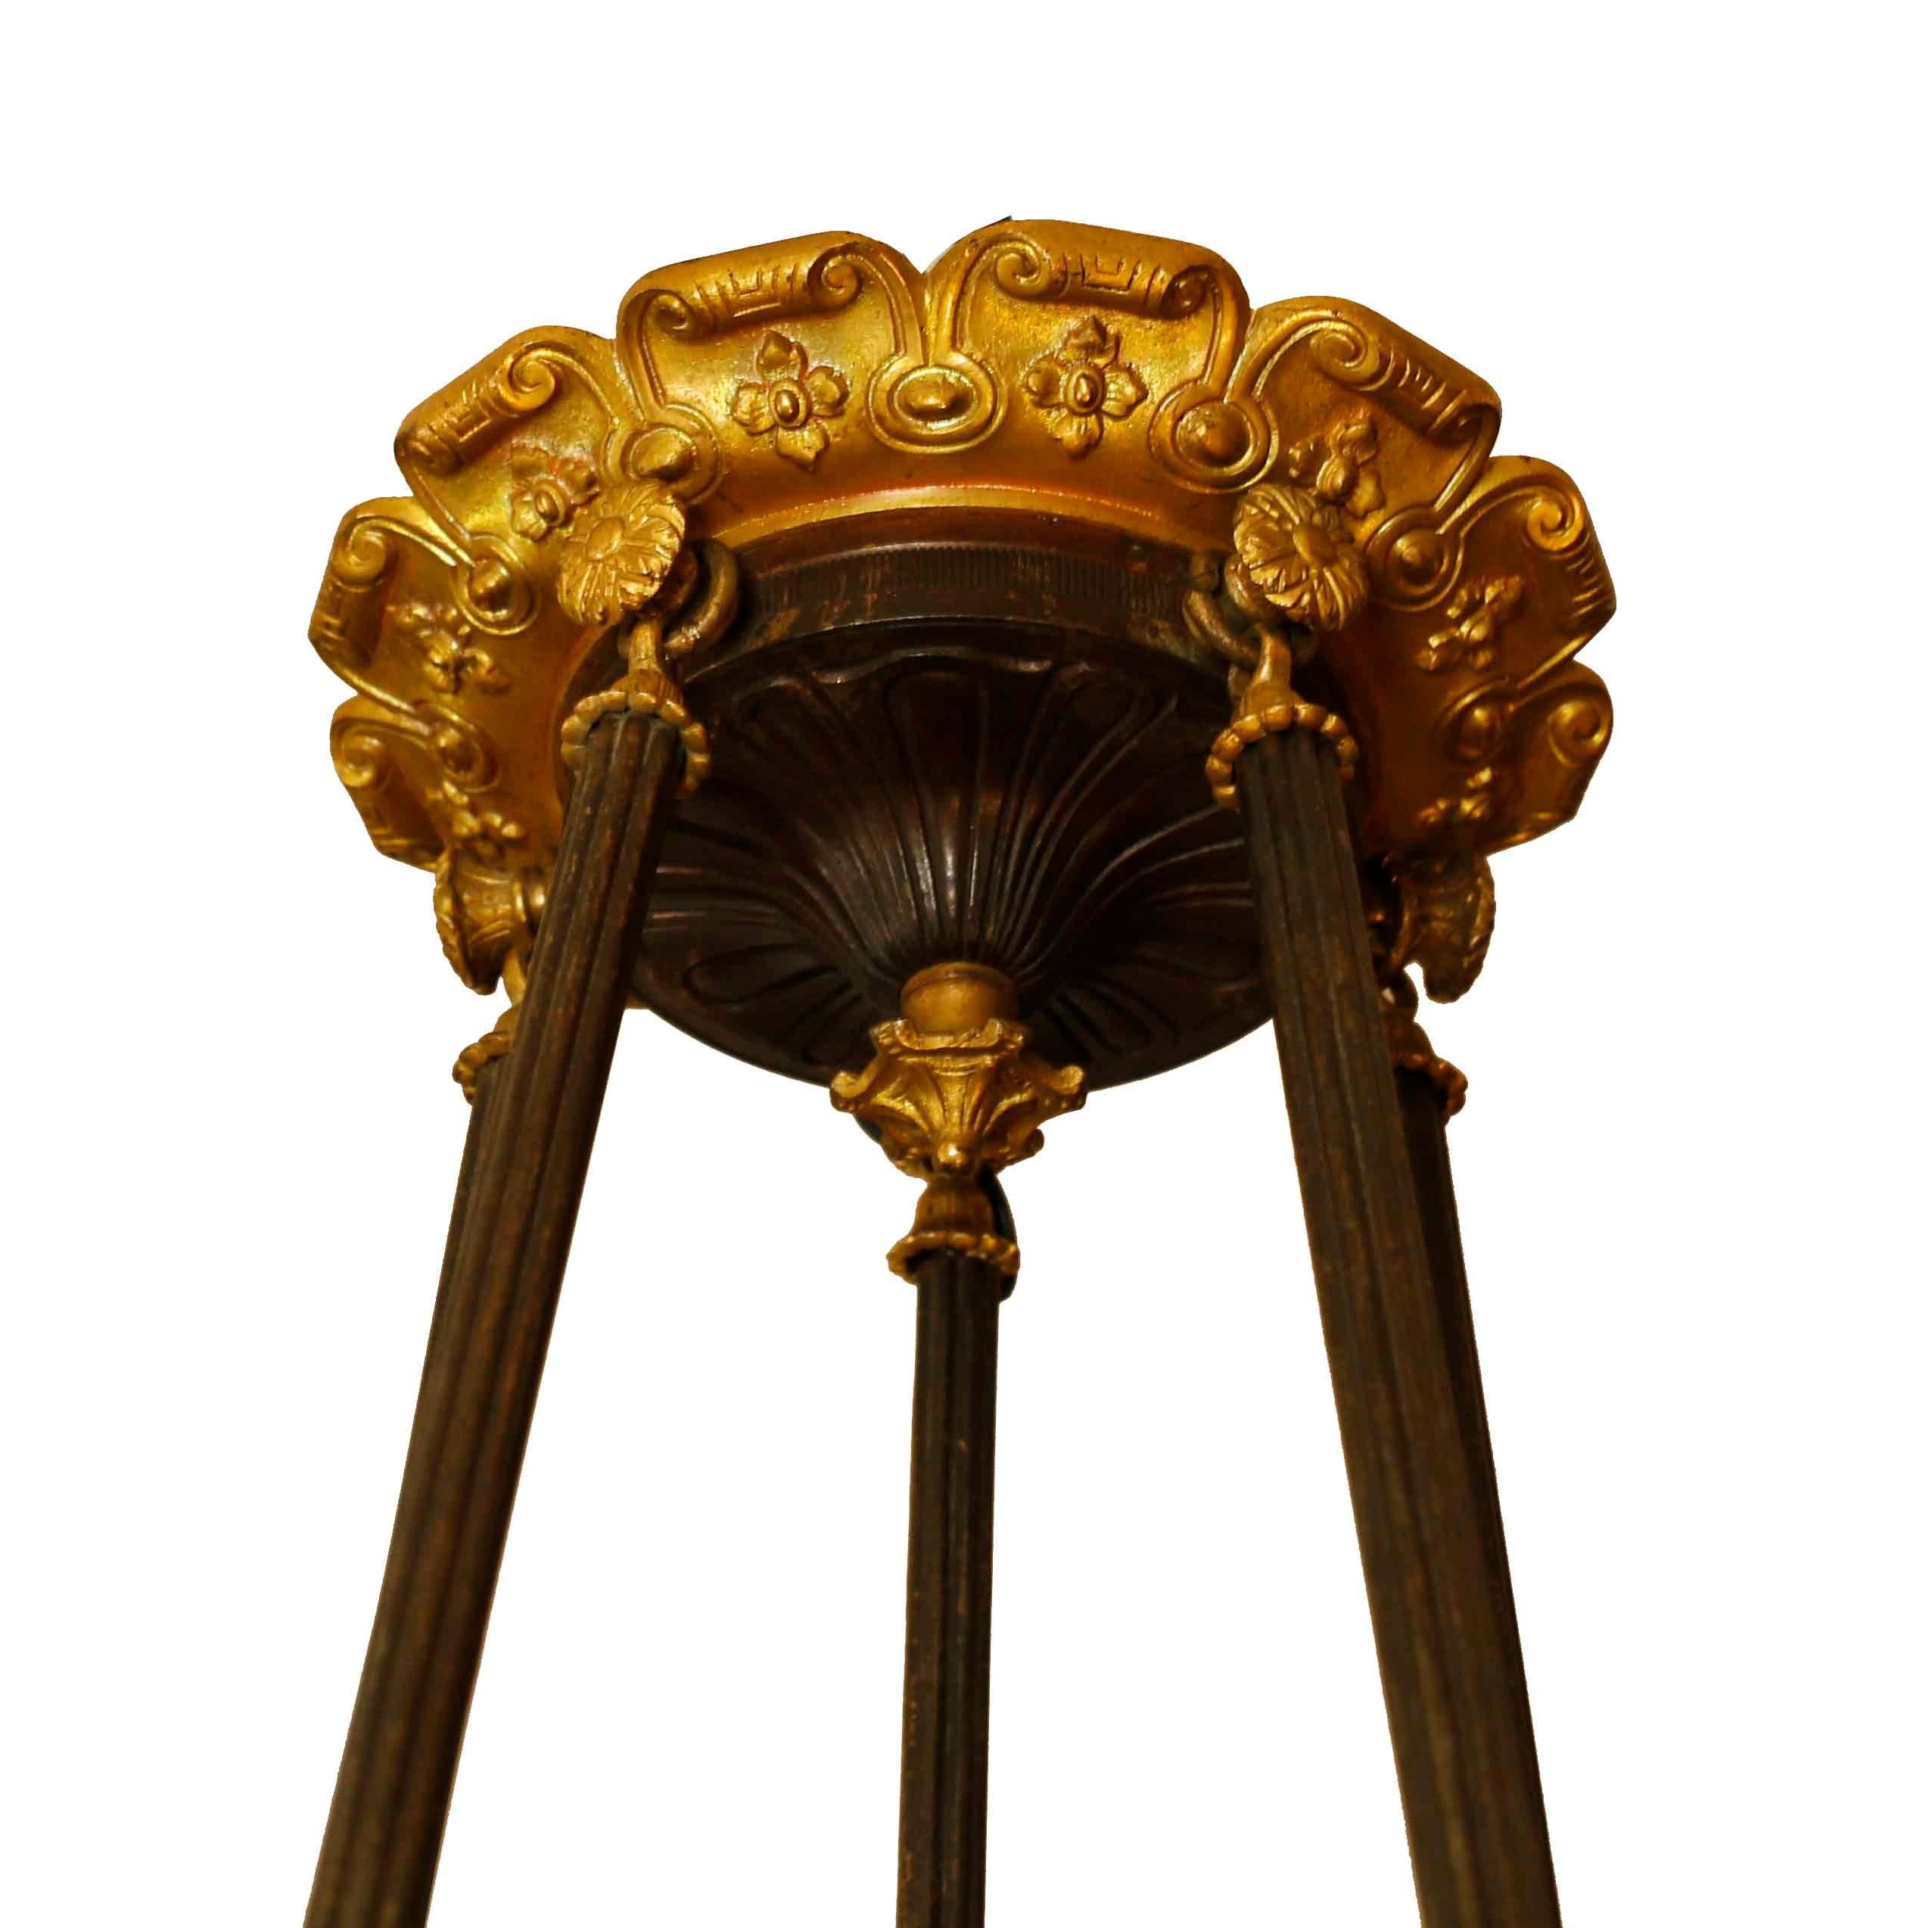 19th Century French Charles X Ormolu and Bronze Chandelier with Five Lights For Sale 1